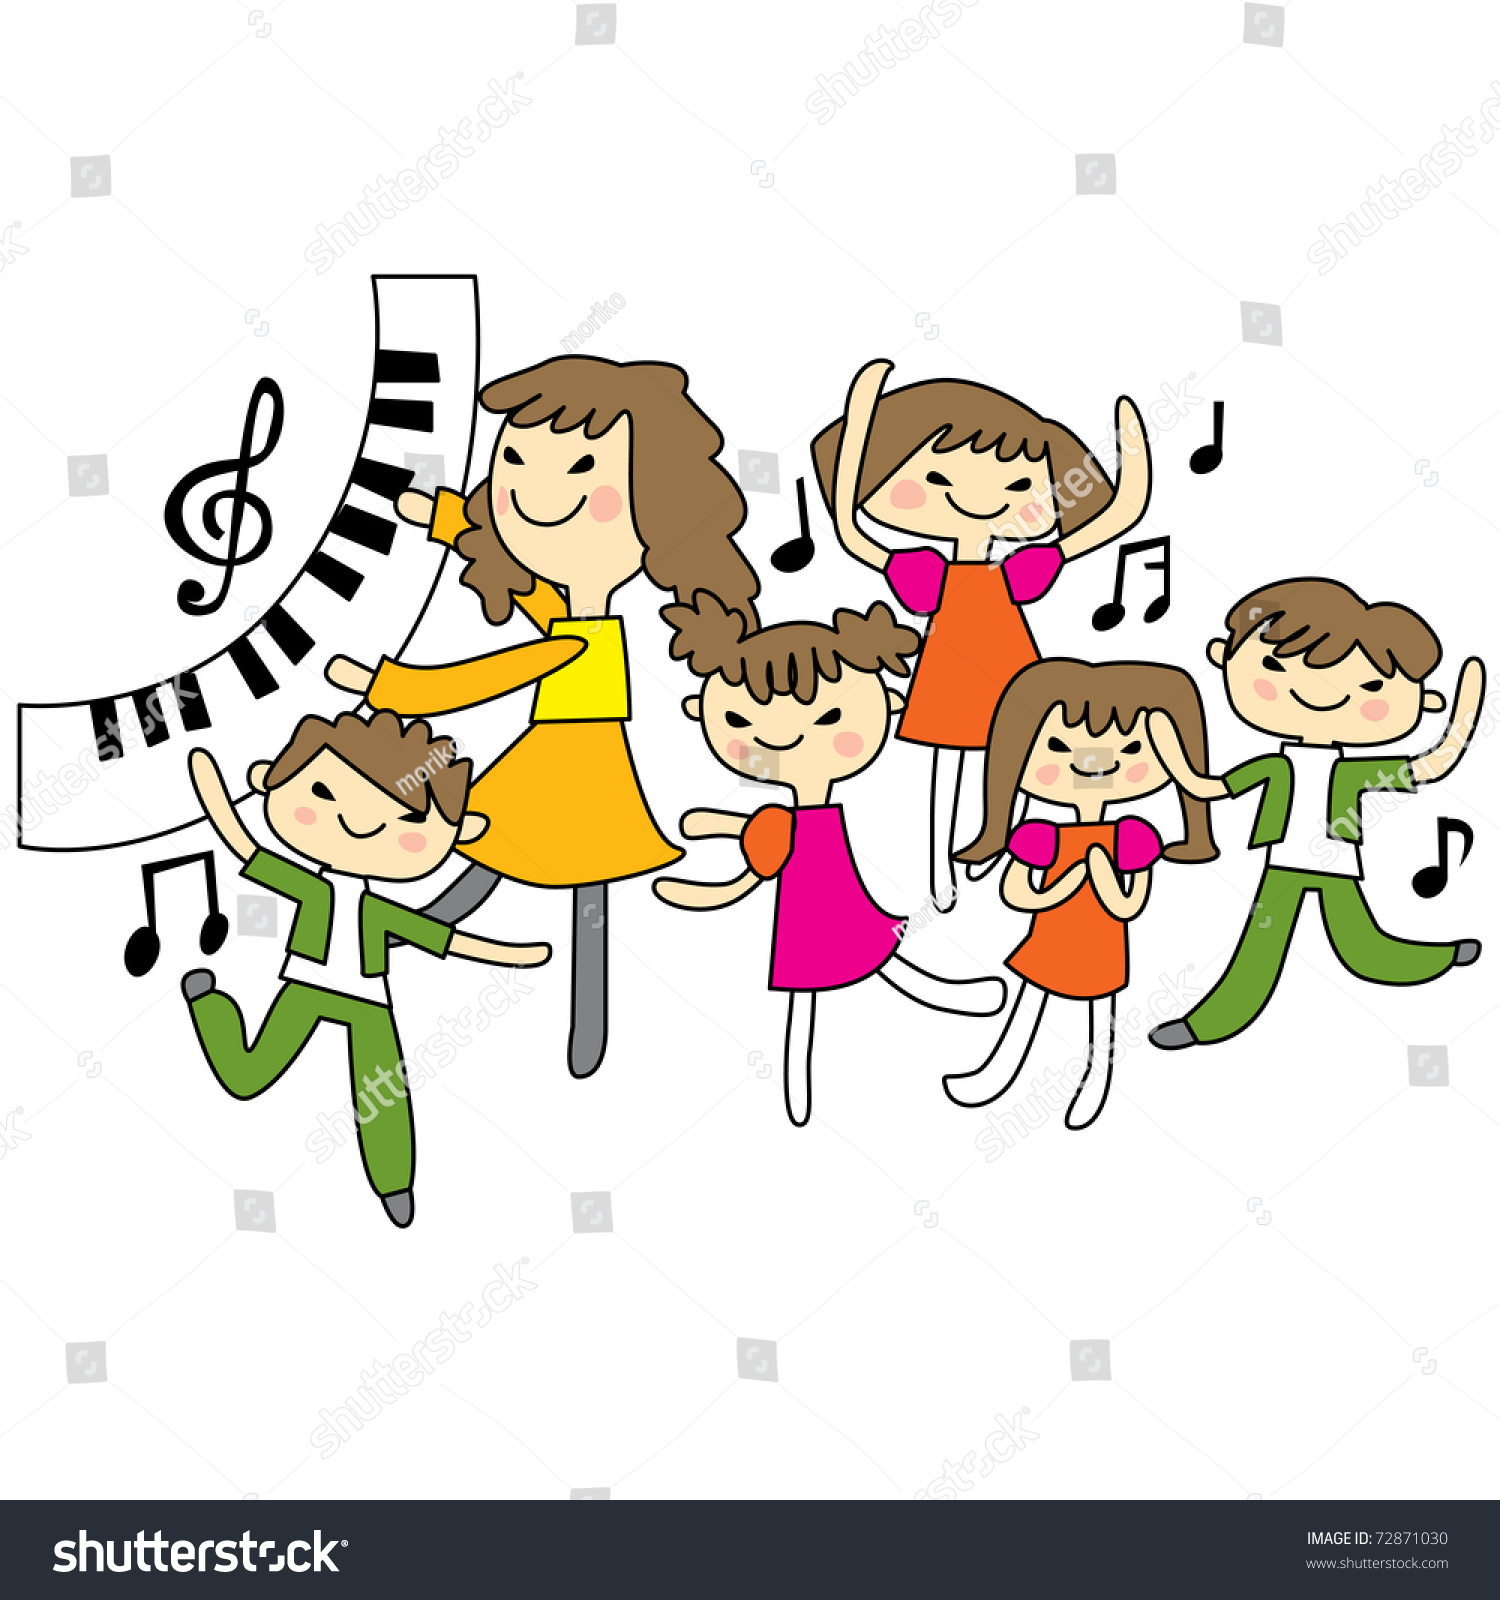 free music education clipart - photo #10